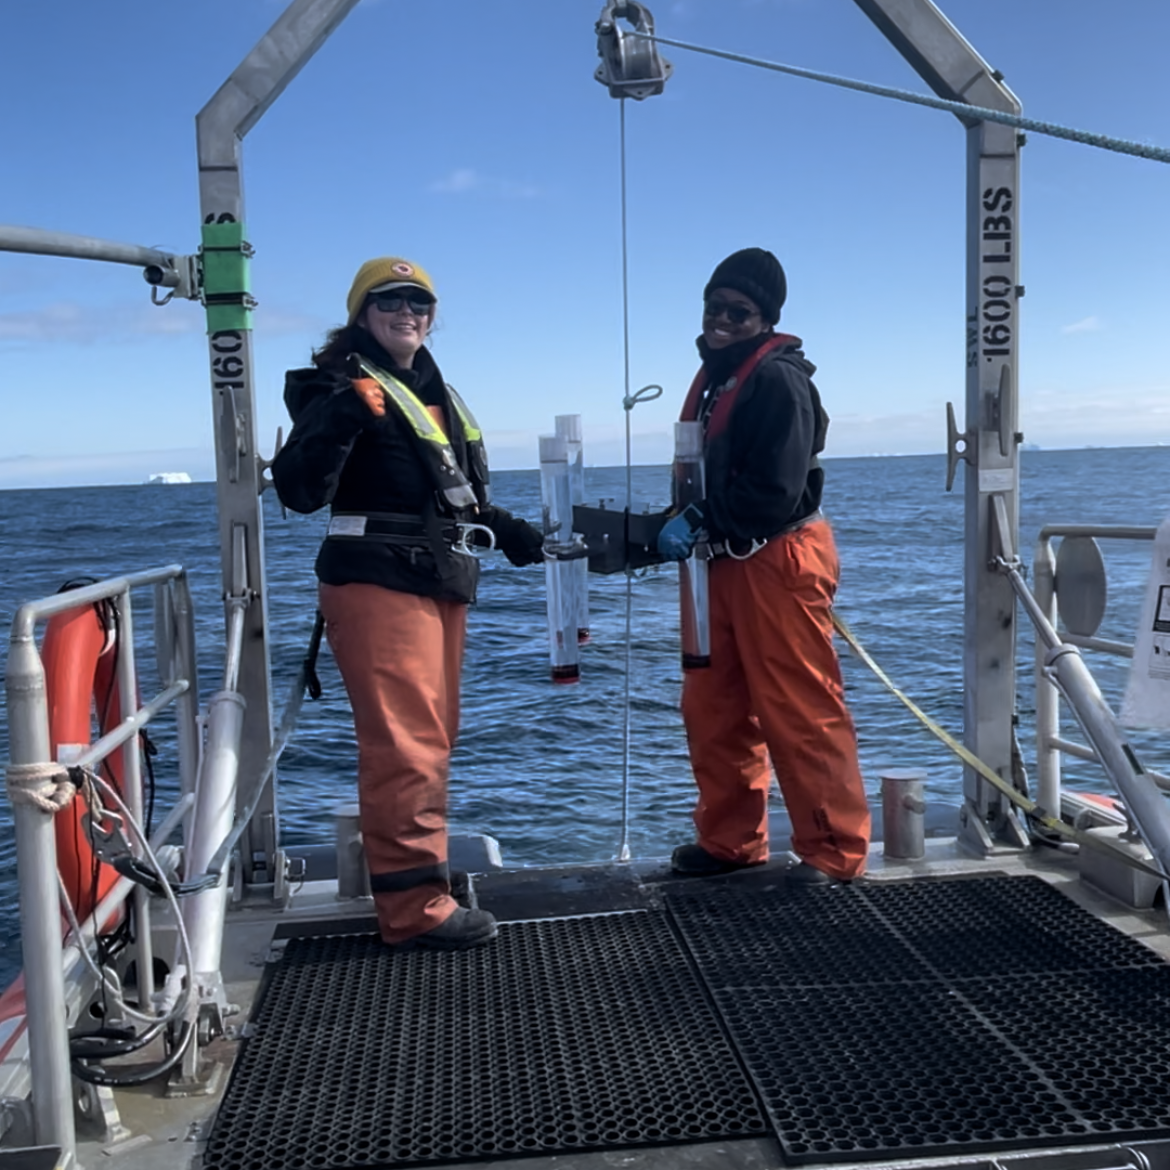 Shavonna partakes in shipboard operations including the deployment and recovery of a particle interceptor trap (which captures actively sinking ocean particles). Photo credit Shavonna Bent.